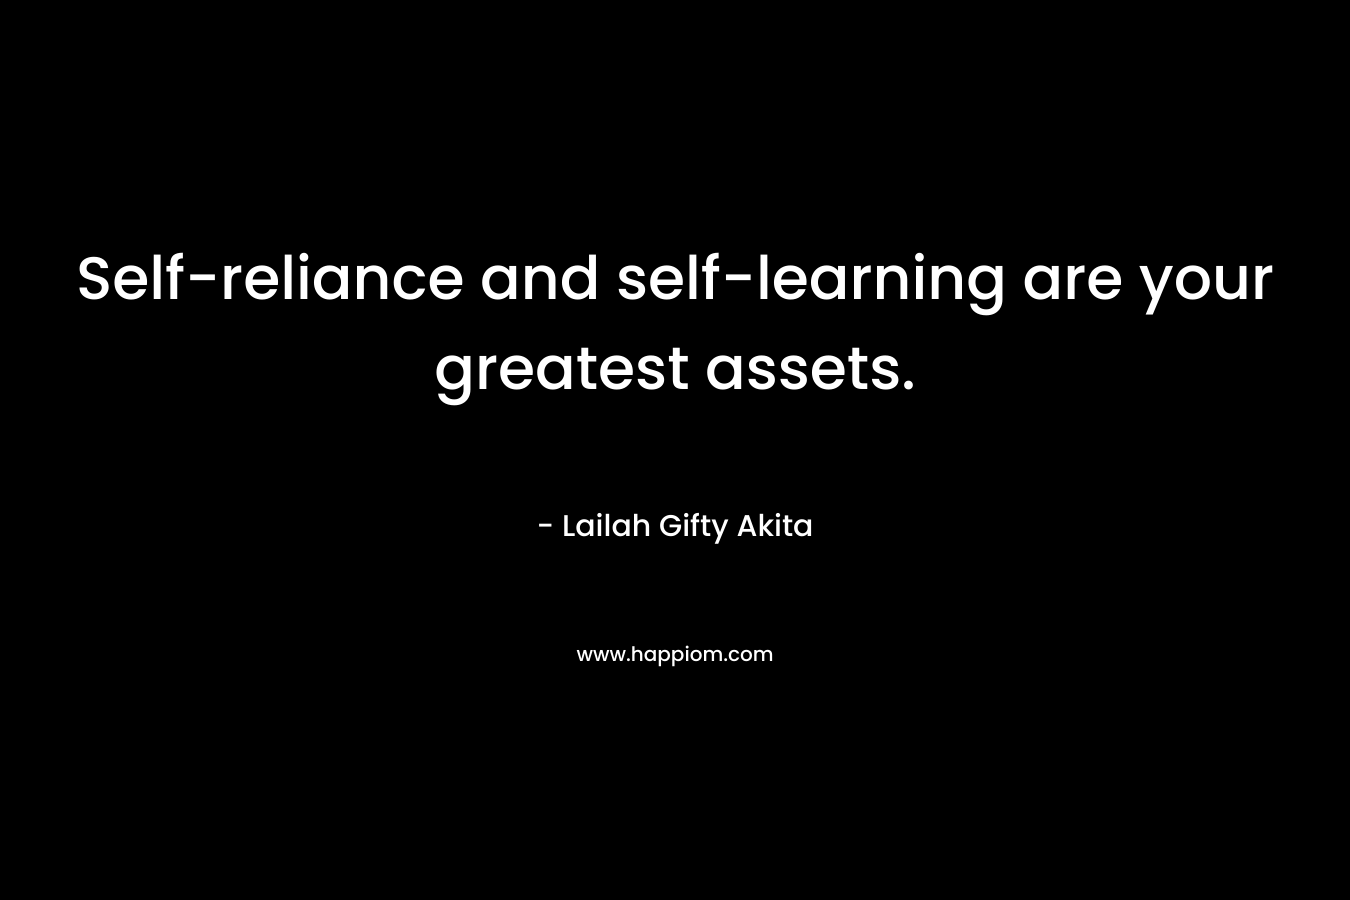 Self-reliance and self-learning are your greatest assets.